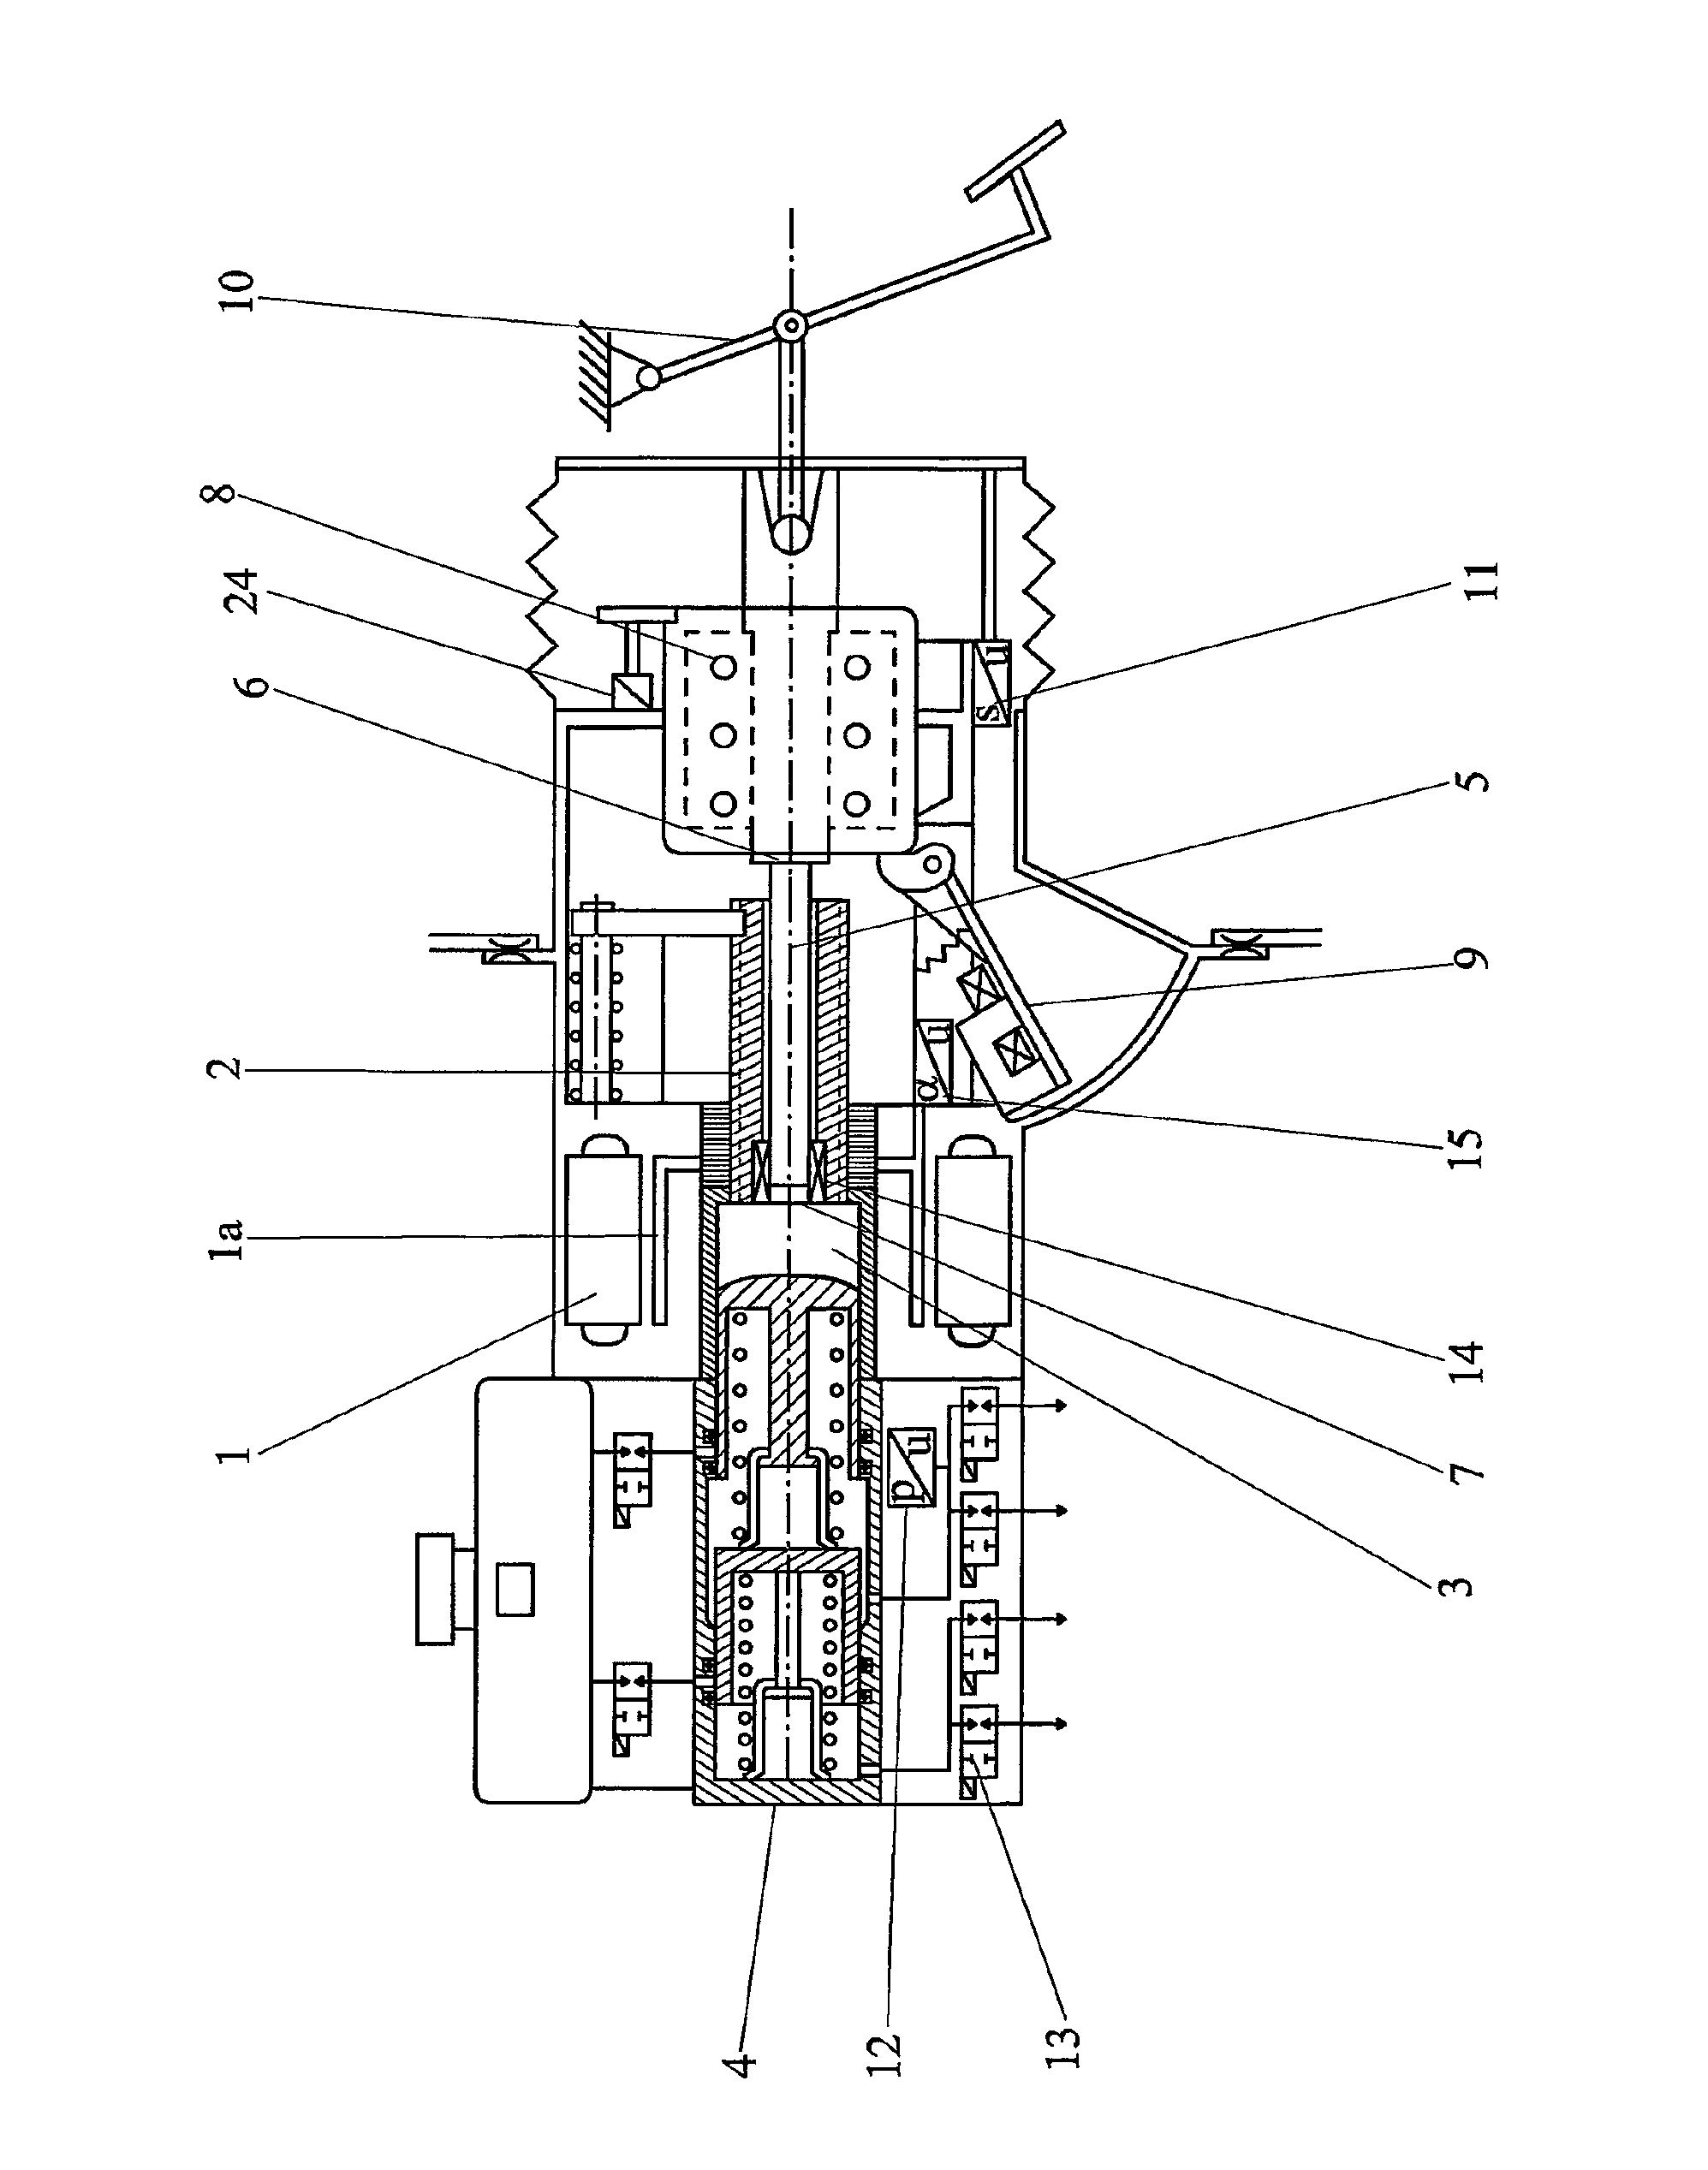 Brake system having a connection, which can be switched by means of a brake pedal, for decoupling a drive device from a piston-cylinder unit